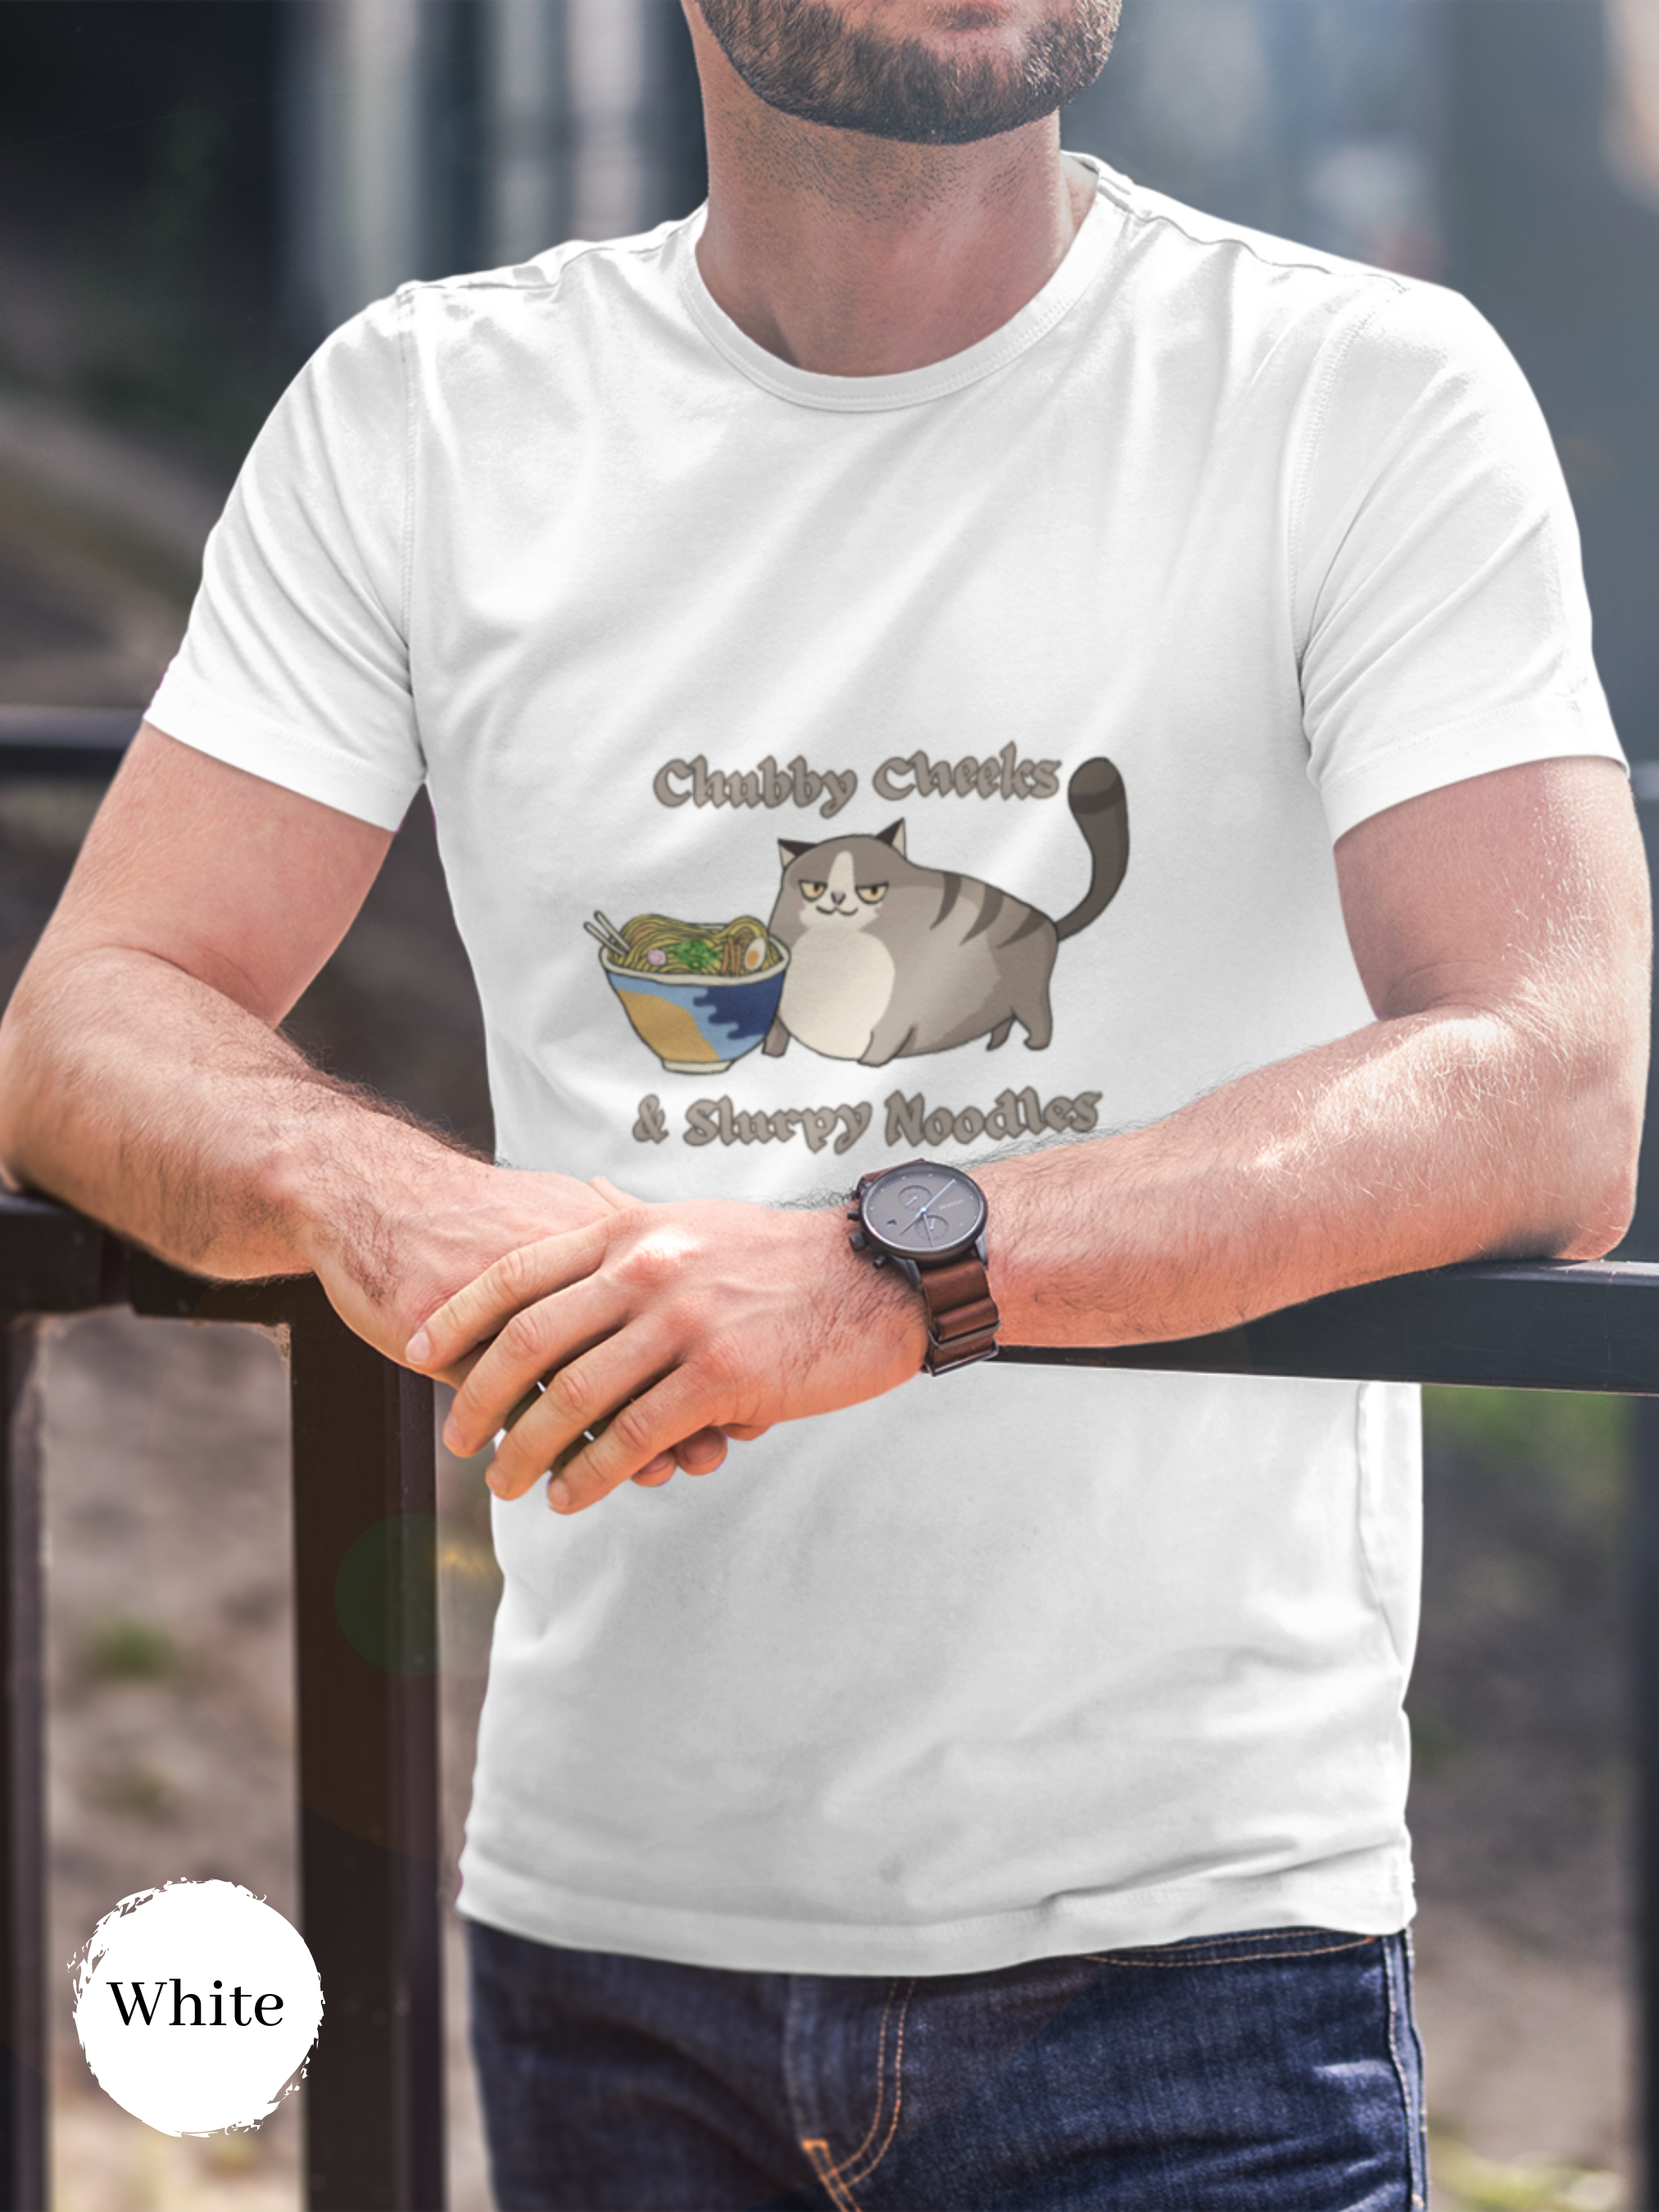 Ramen T-Shirt: Chubby Cheeks and Slurpy Noodles with Mochi Cat - Japanese Foodie Shirt with Ramen Art